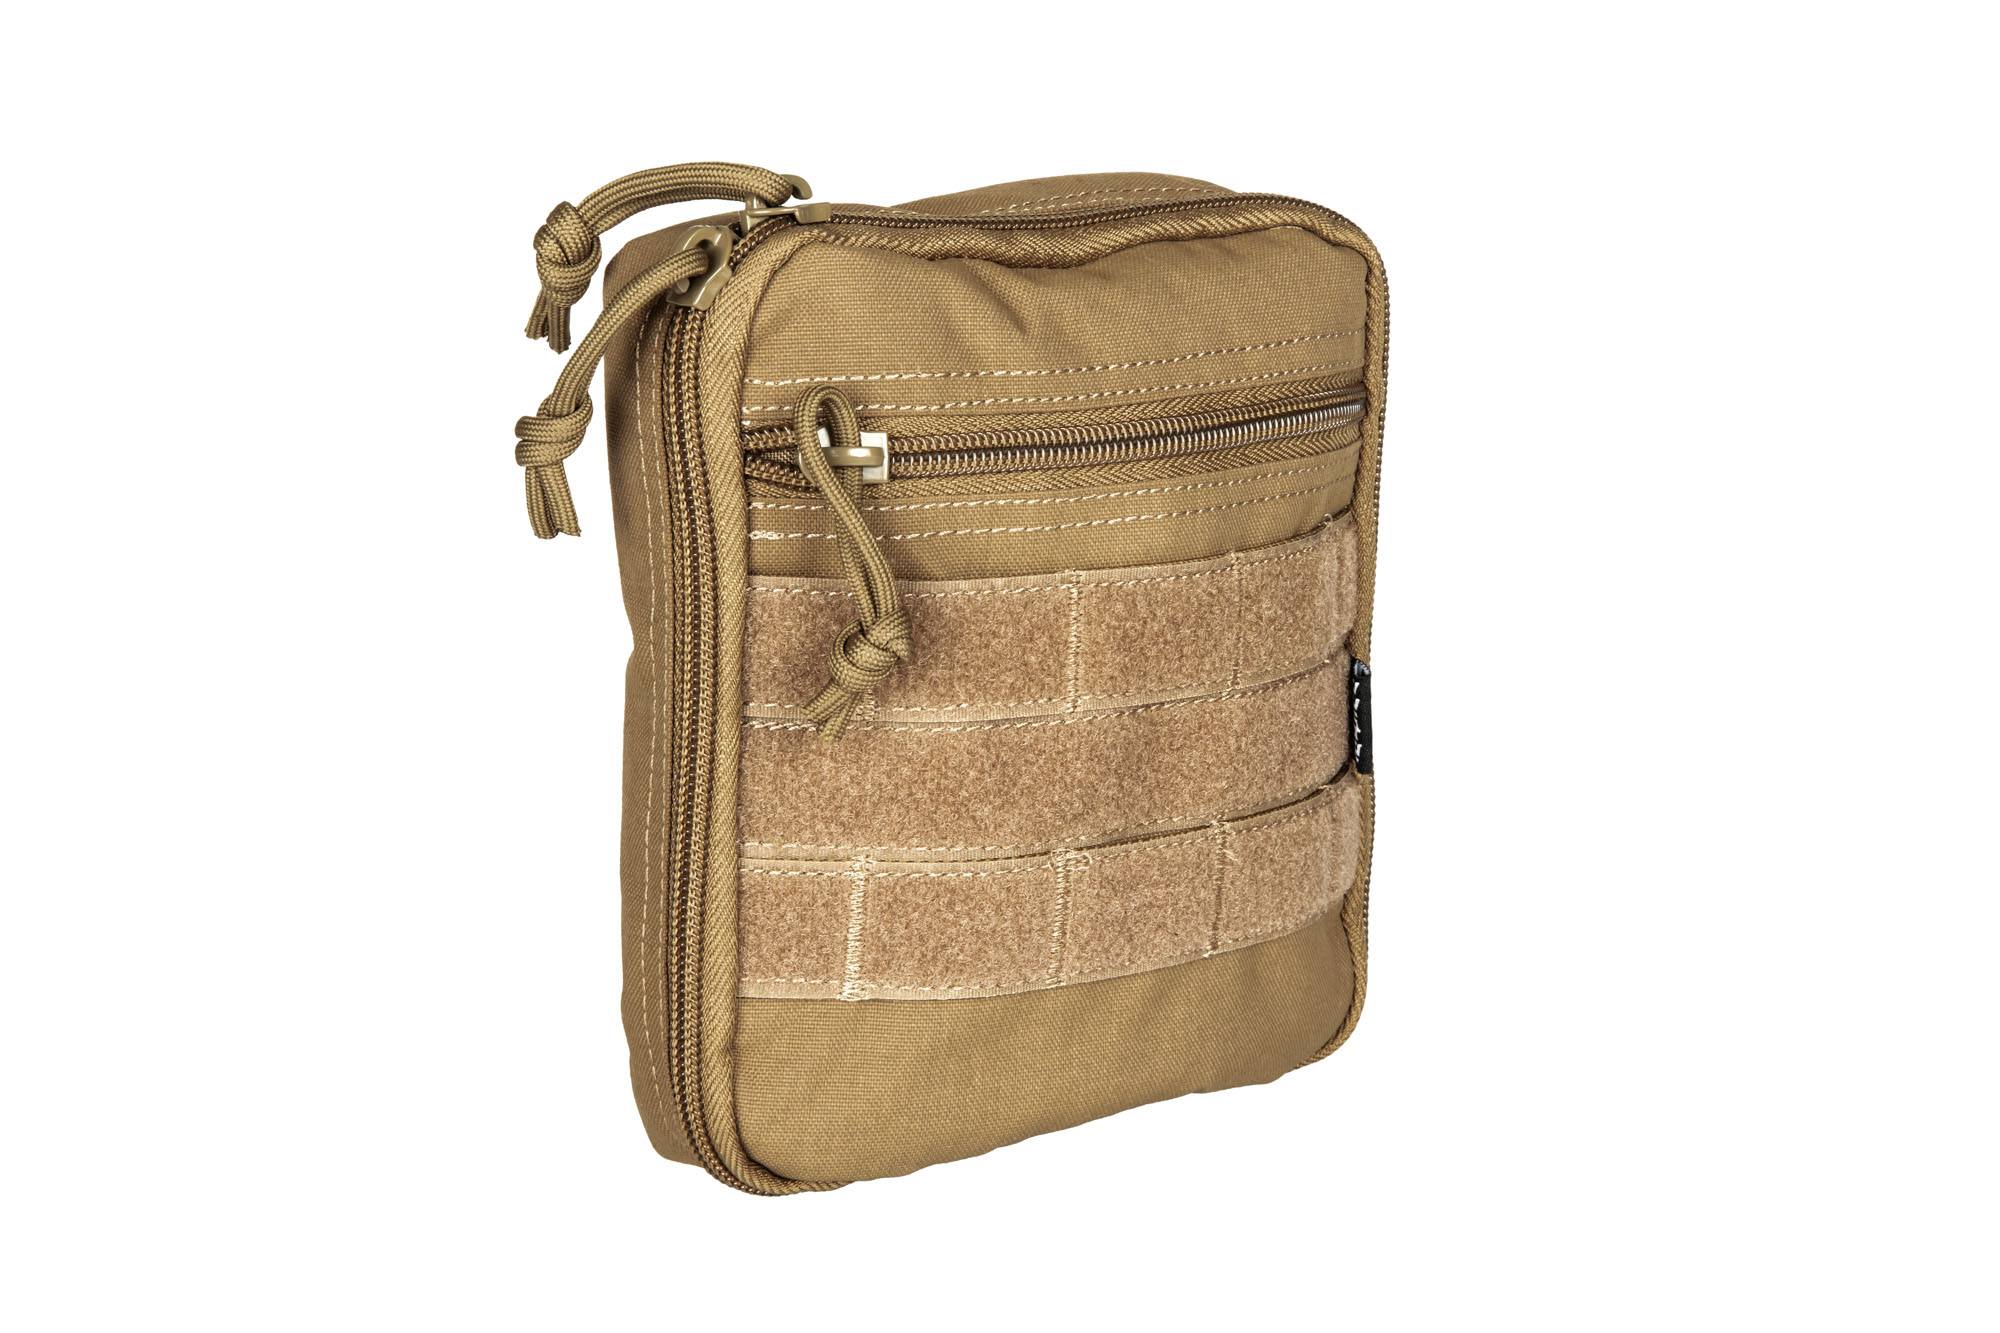 All-Carry Pouch Ofos - Coyote Brown